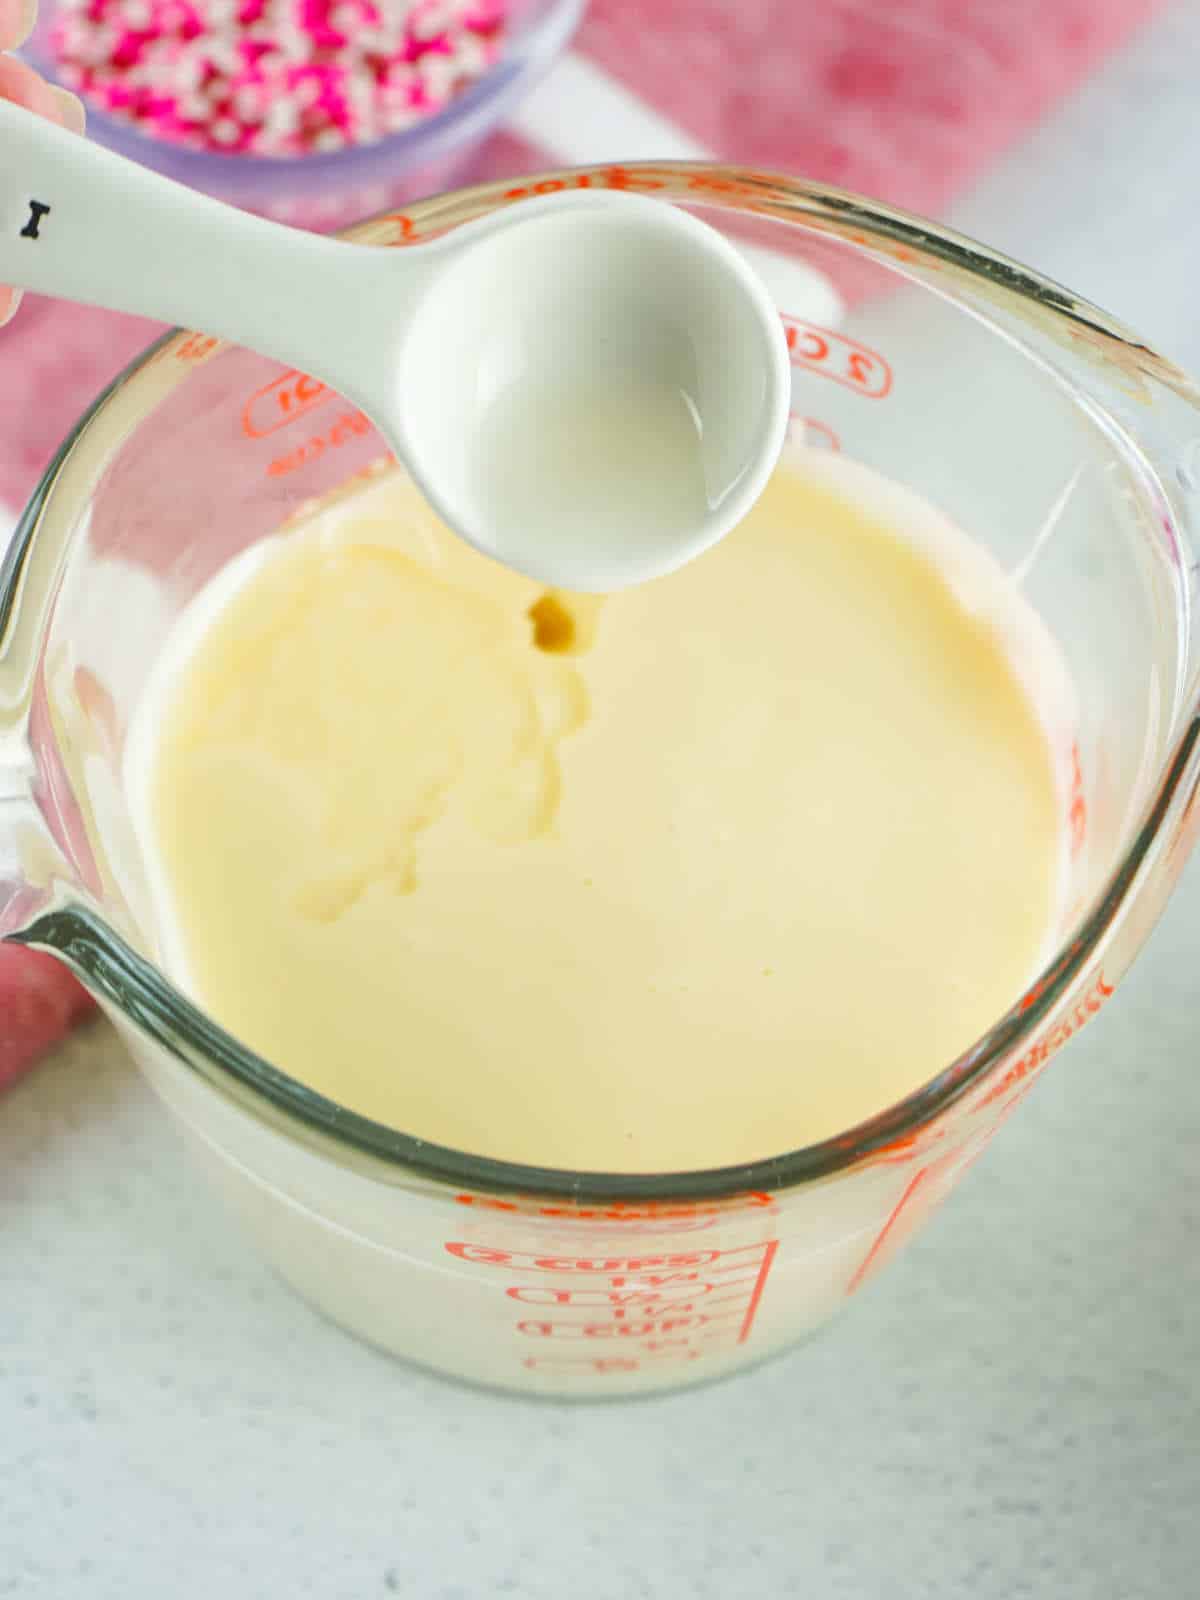 Melted buttercream frosting in a Pyrex measuring cup with vanilla being added.